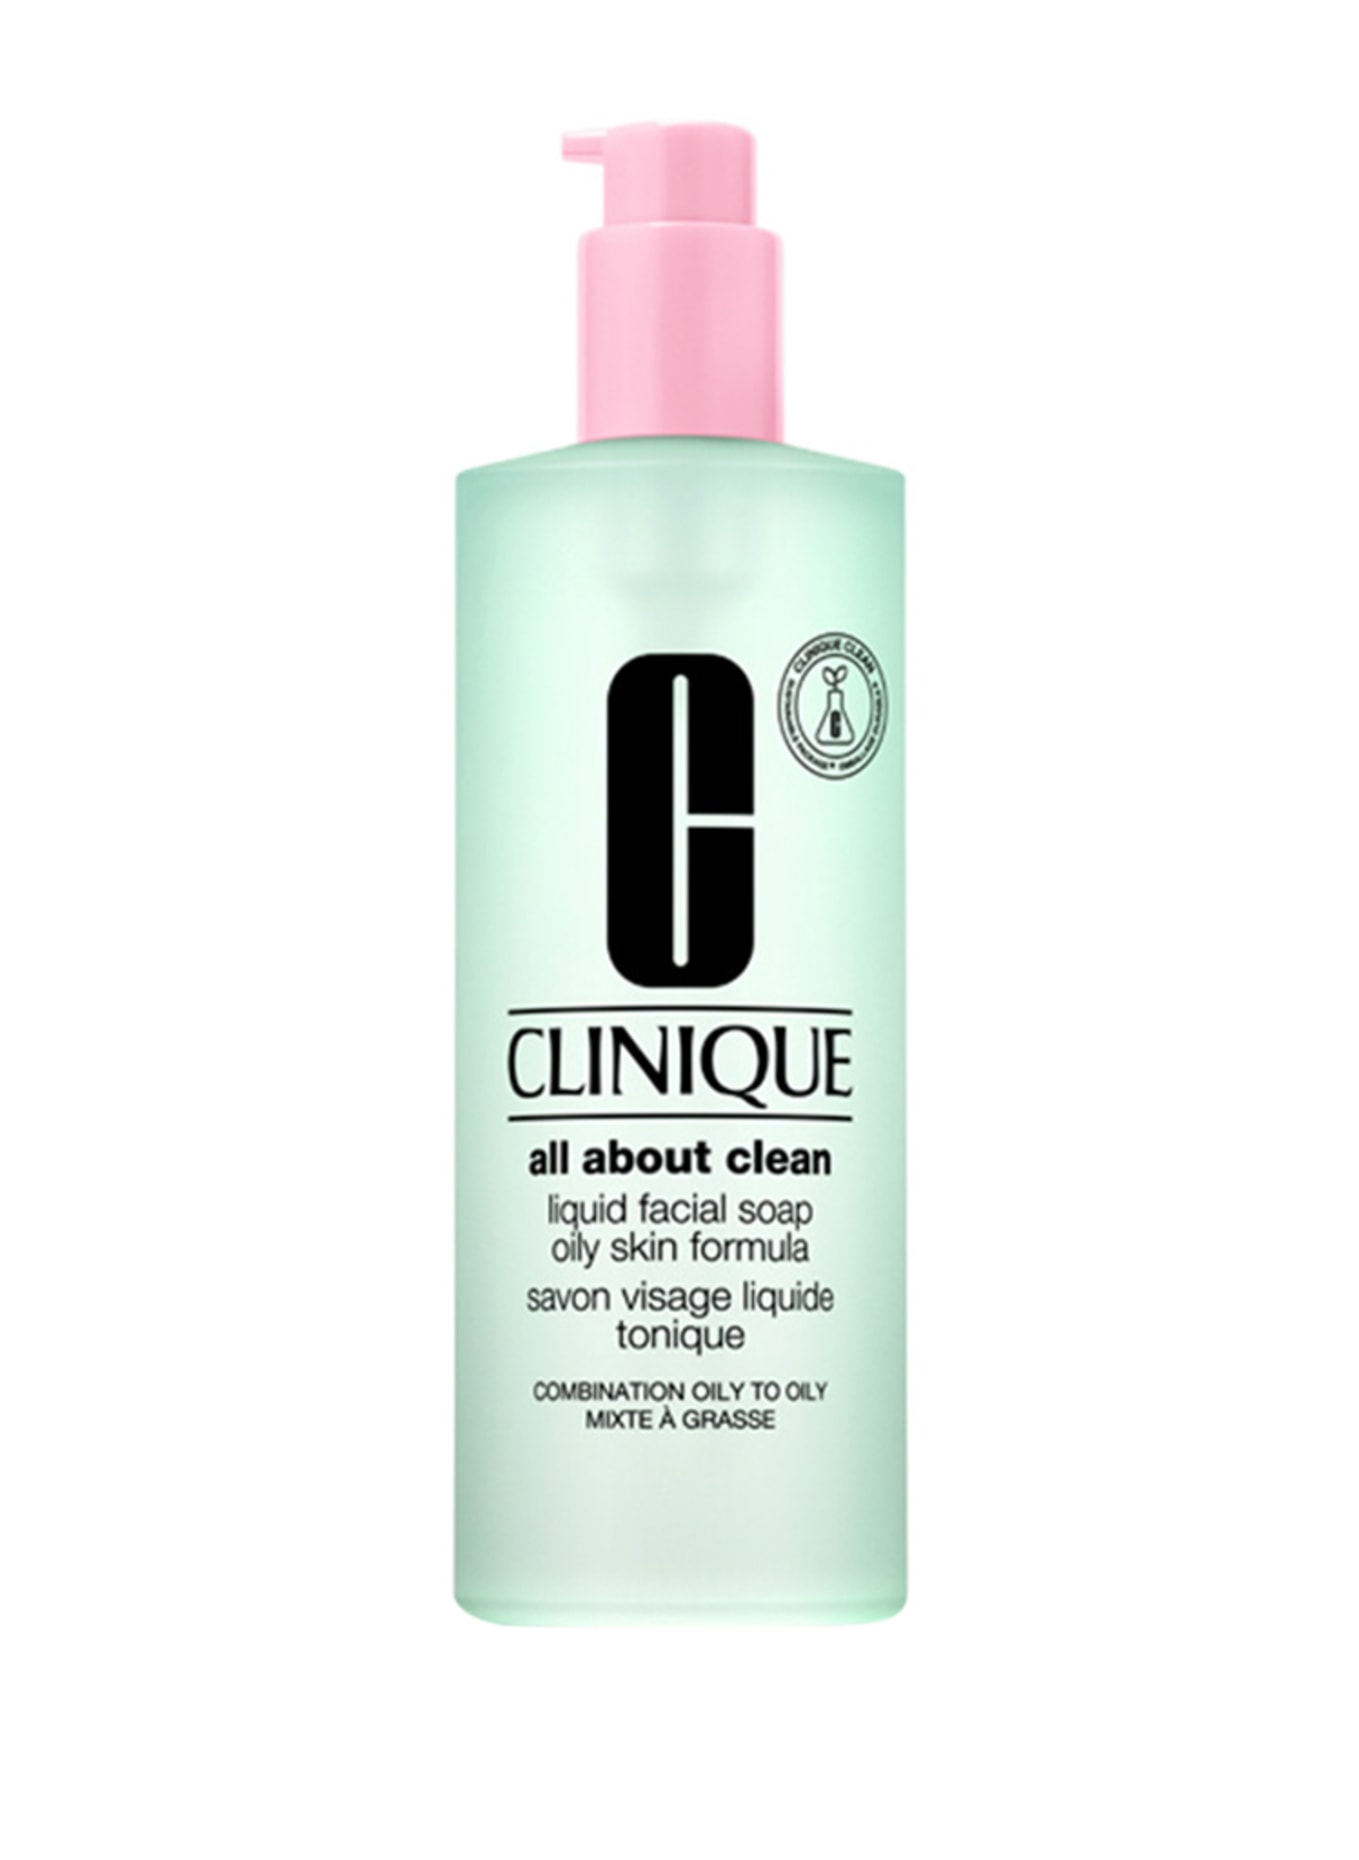 CLINIQUE ALL ABOUT CLEAN (Obrazek 1)